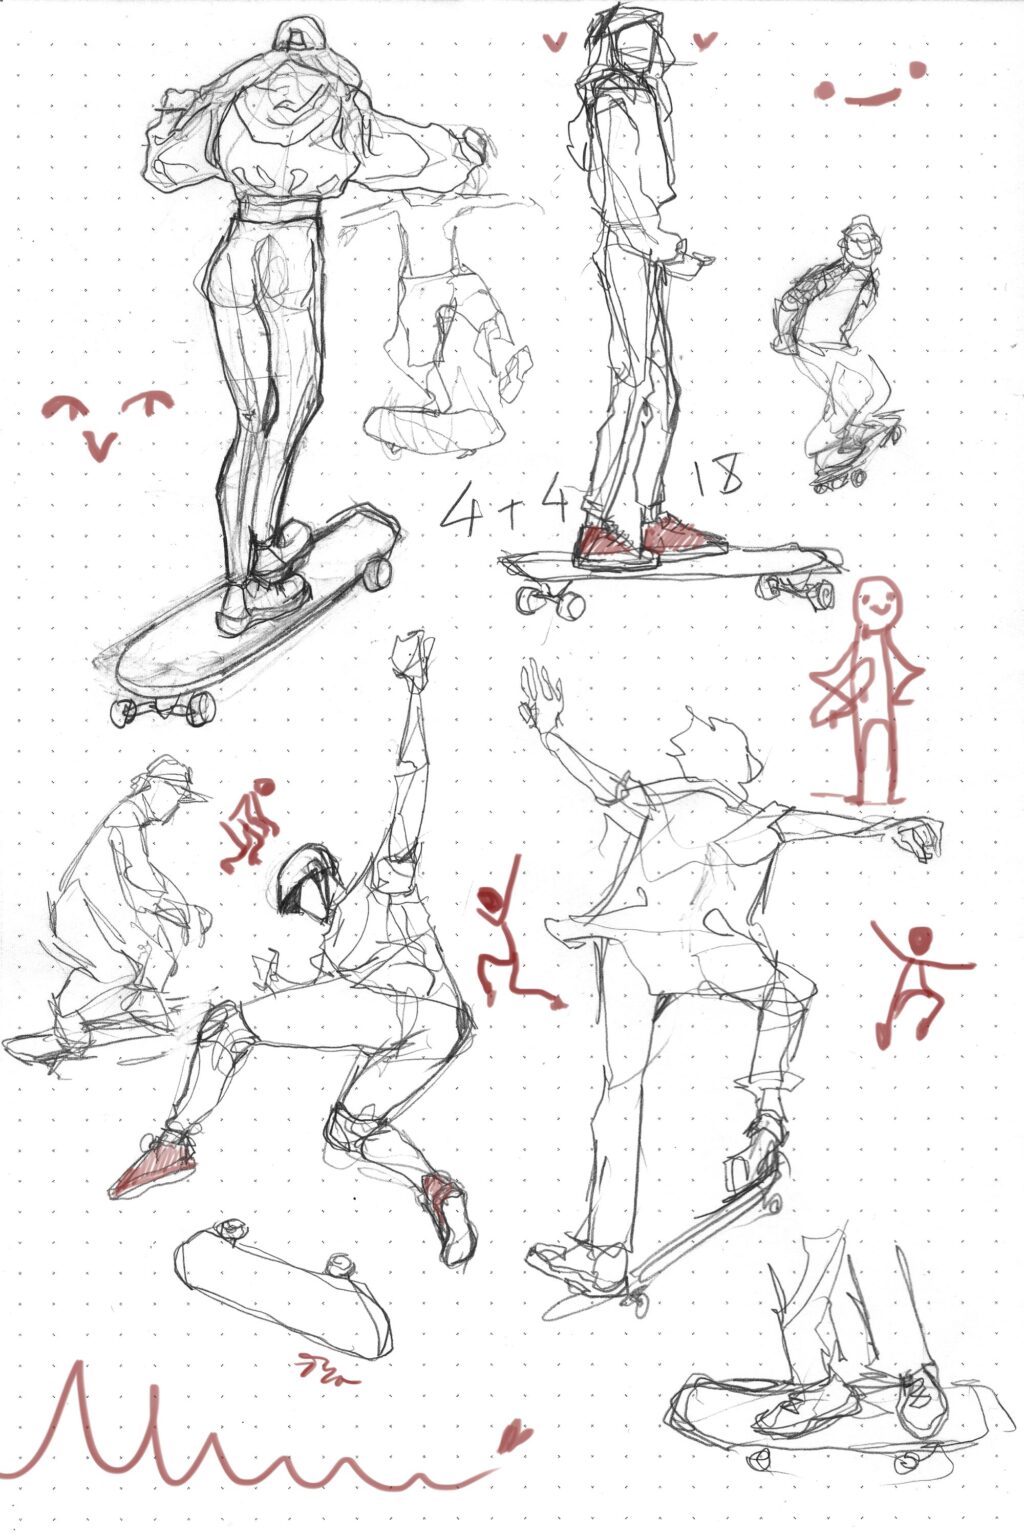 Skateboard poses Drawing Reference and Sketches for Artists